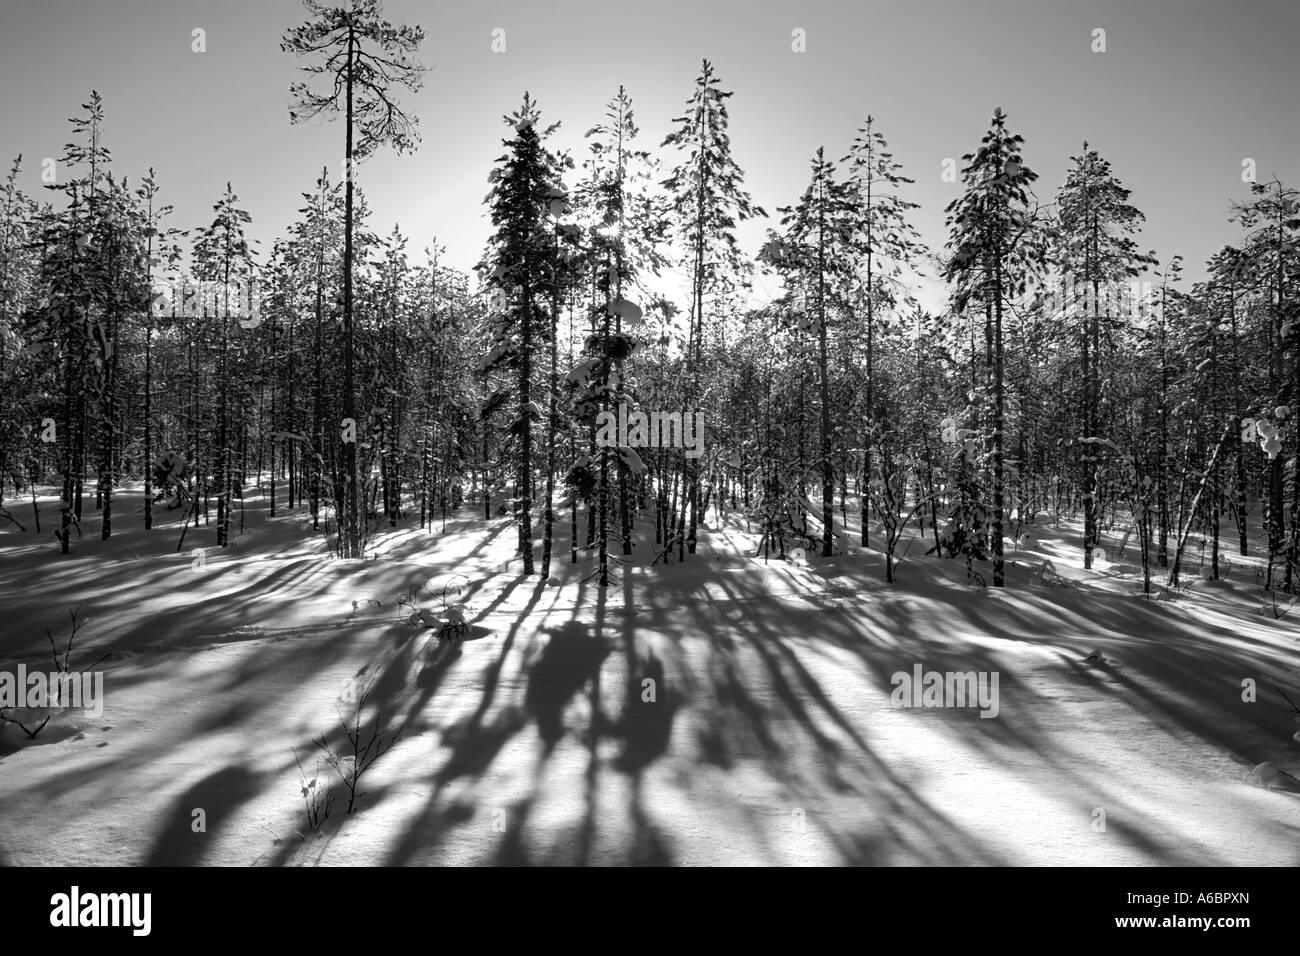 Pine trees in a forest casting long shadows on the ground covered with snow Stock Photo